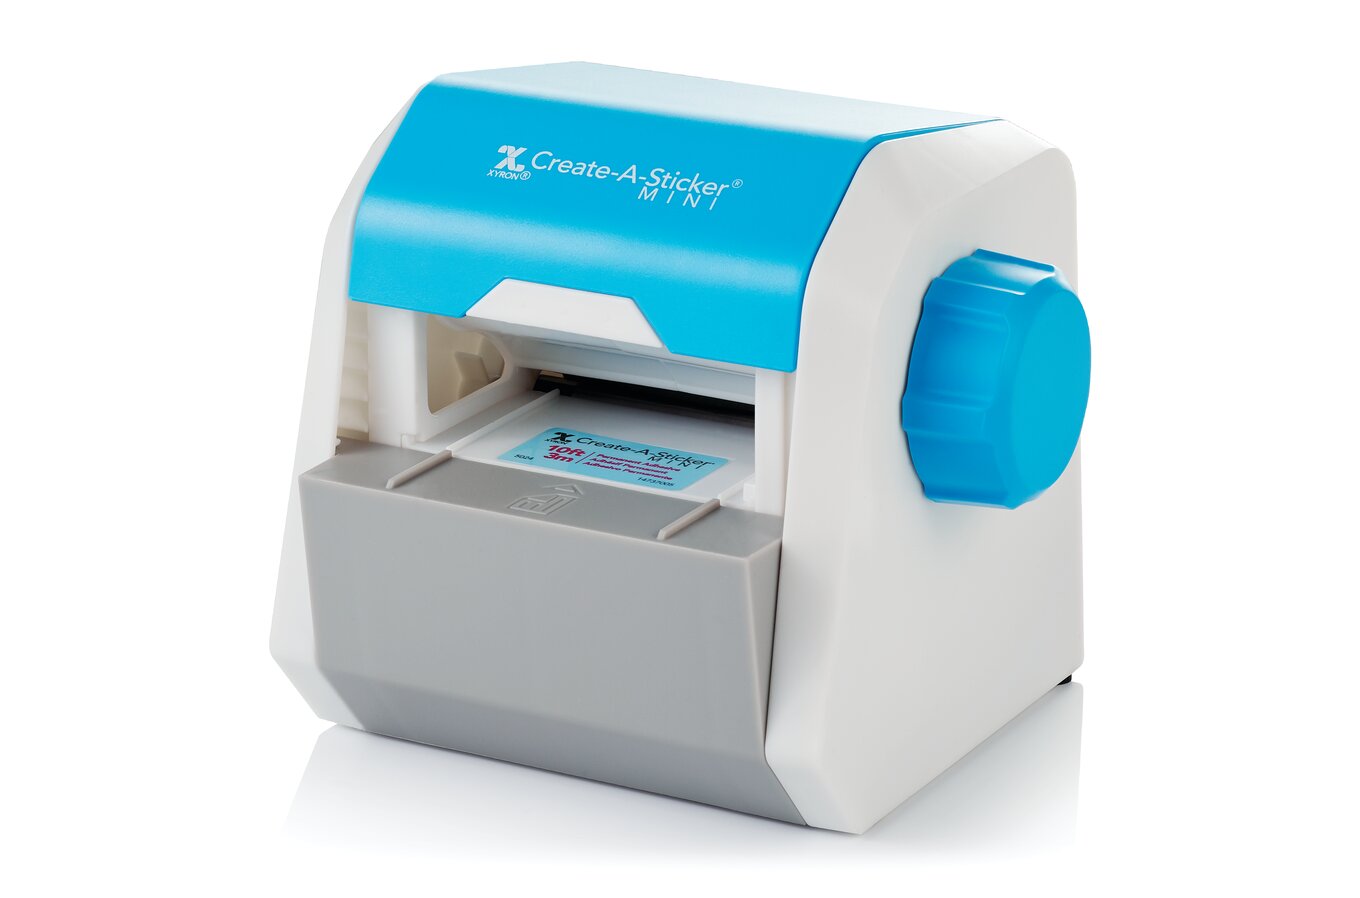  Xyron Create-A-Sticker, Mini, 2.5” Sticker and Label Maker  Machine, Portable, Includes Permanent Adhesive, Pre-Loaded, Color May Vary  (XRN250-CFTEN) : Arts And Crafts Adhesives : Office Products